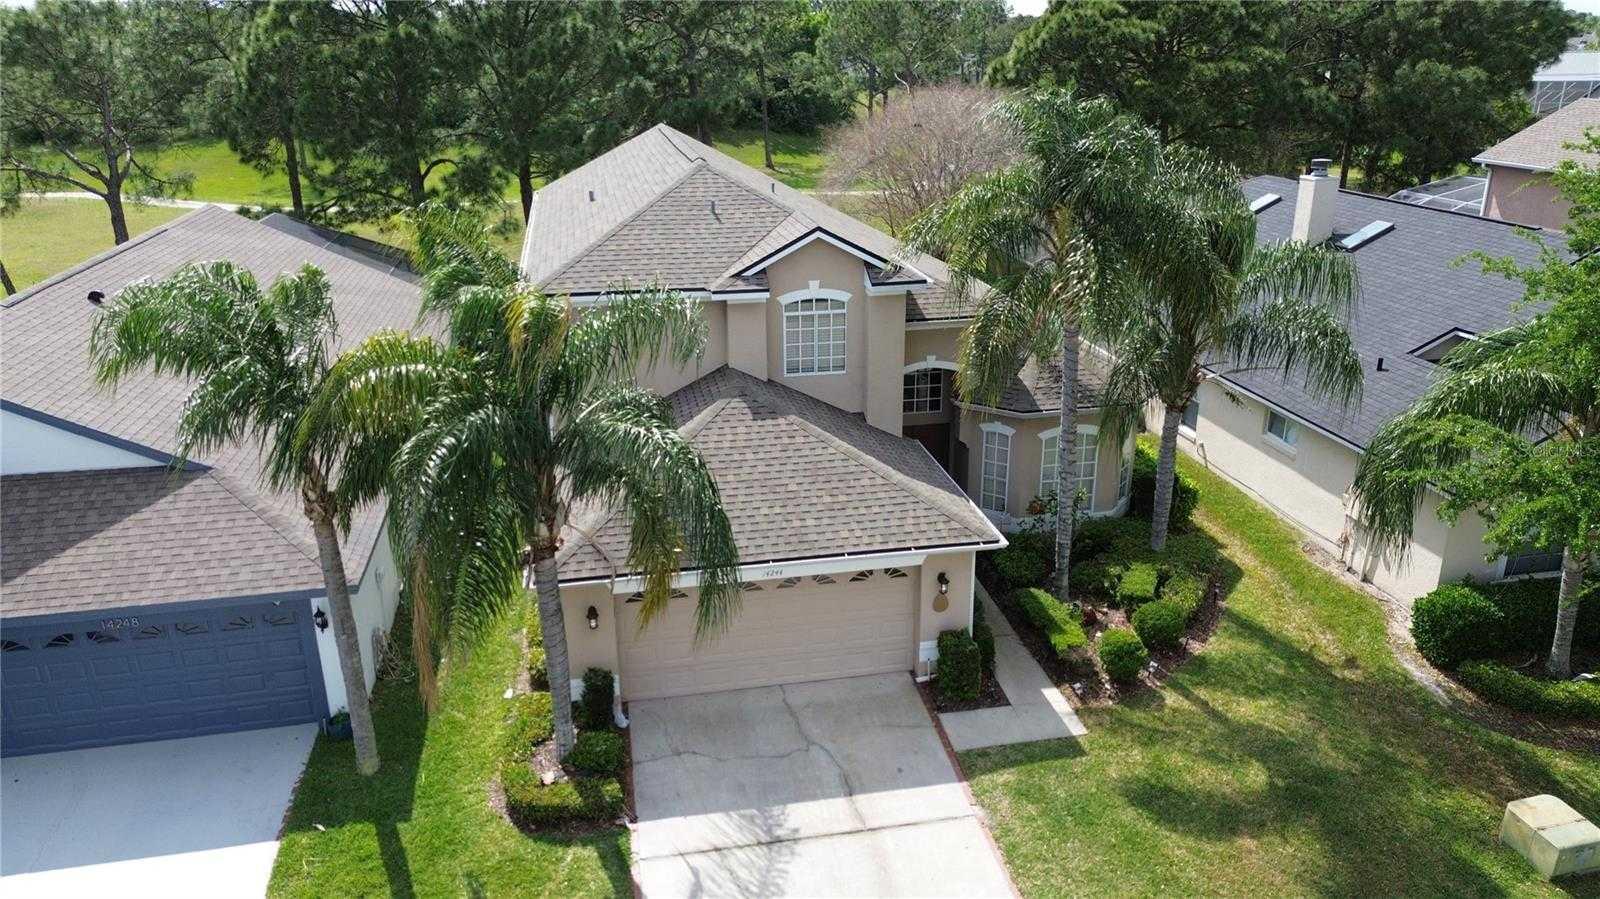 14244 SPORTS CLUB WAY, ORLANDO, Single-Family Home,  for sale, InCom Real Estate - Sample Office 